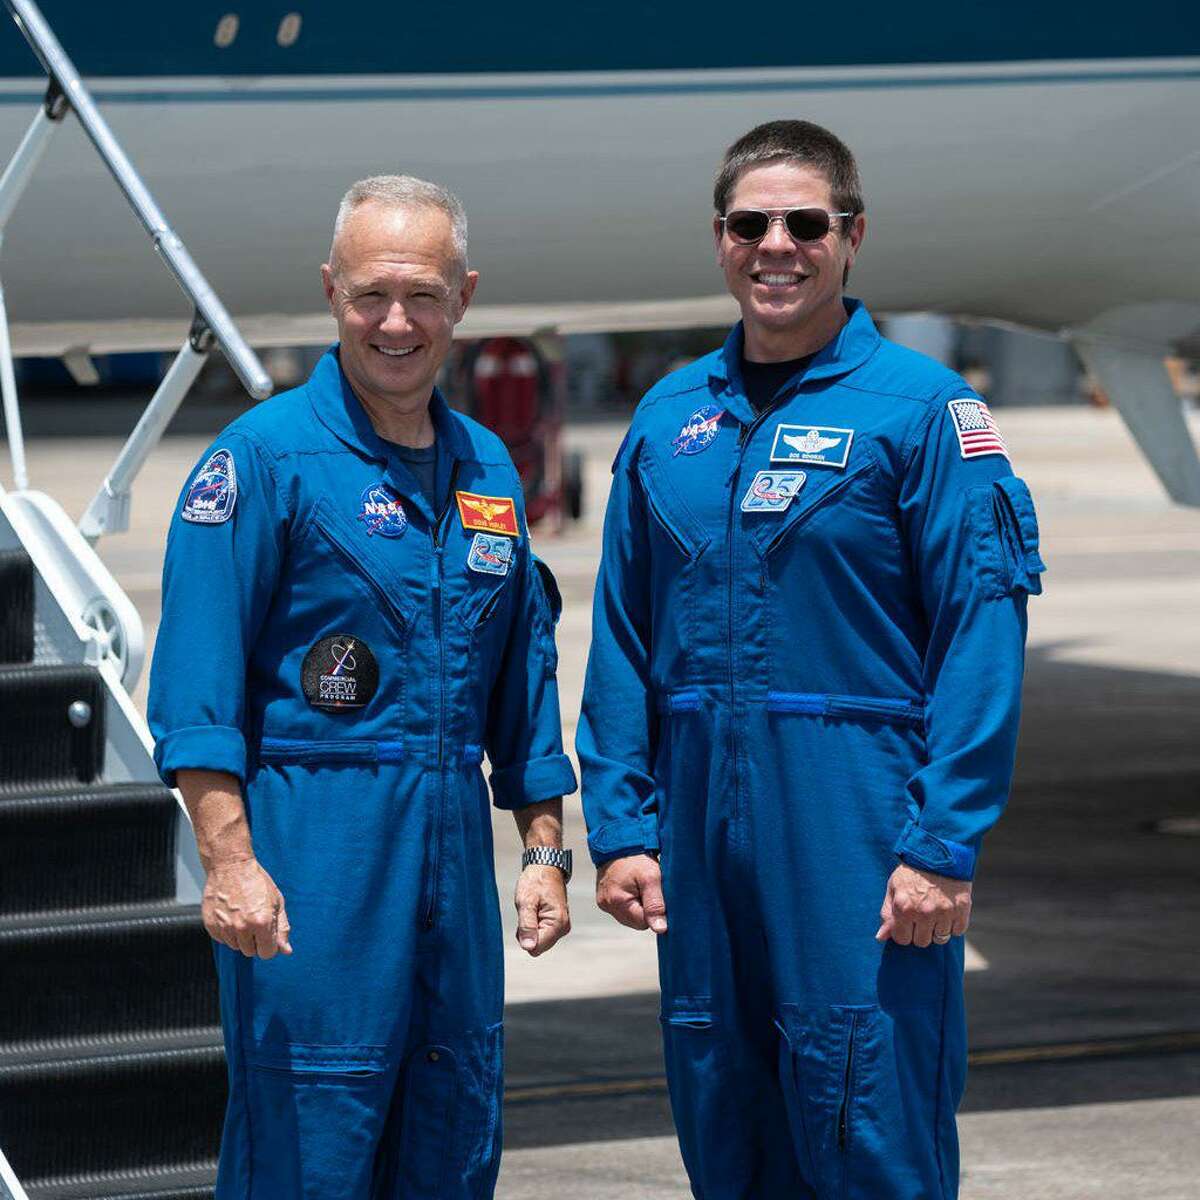 Astronauts Doug Hurley, left, and Bob Behnken at Ellington Airport on May 20, 2020. They are departing Houston for Kennedy Space Center in Florida, where they will launch into space on May 27 on a SpaceX Falcon 9 rocket and Crew Dragon spacecraft.